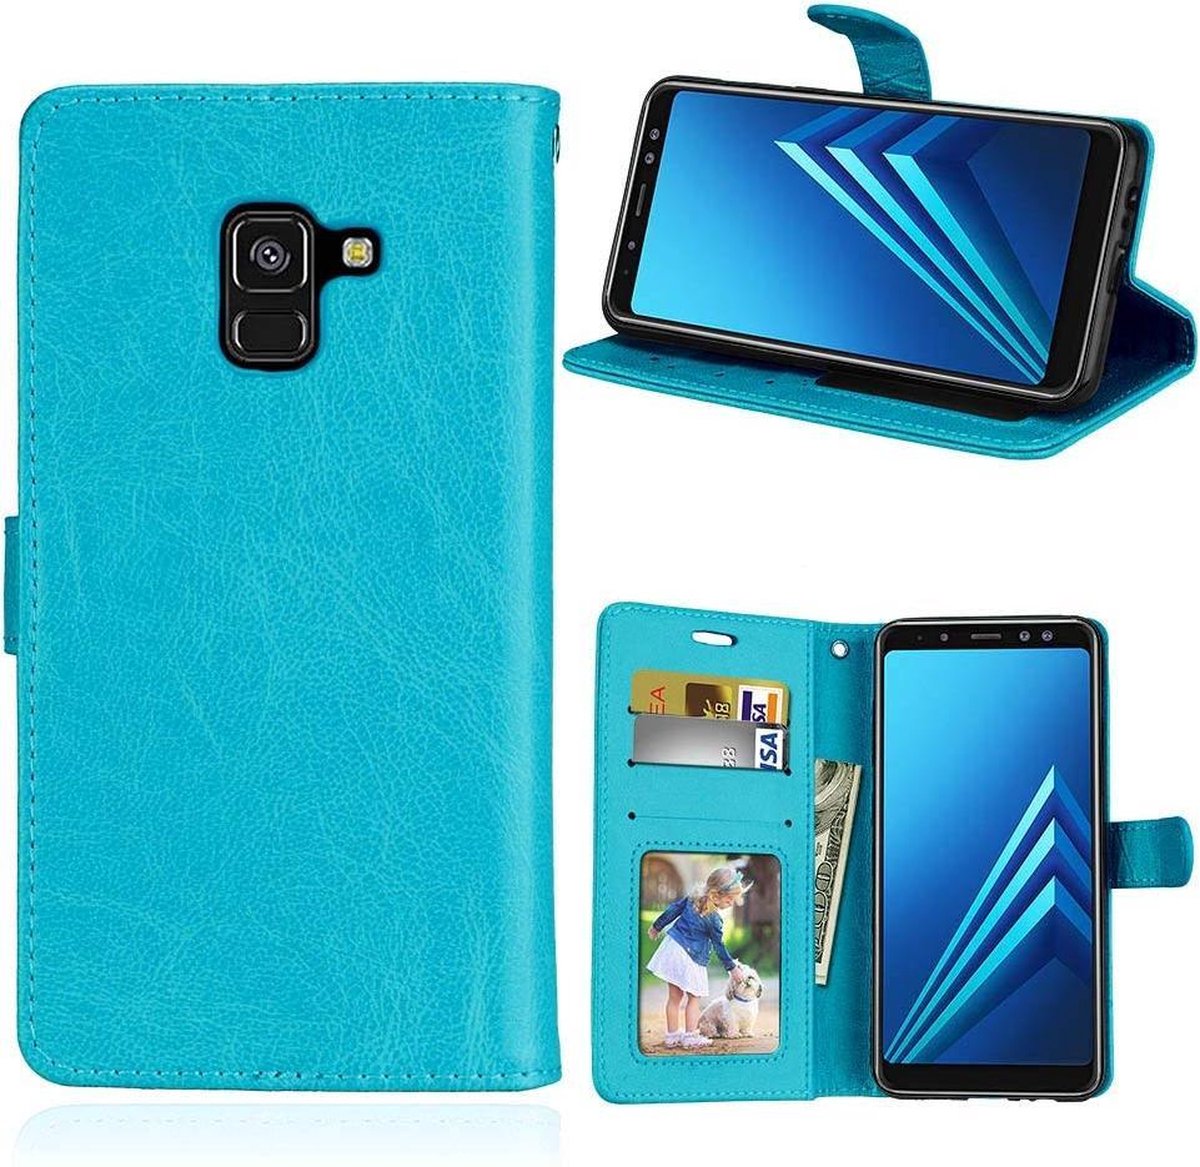 Portemonnee case hoesje Turquoise Samsung Galaxy A6 Plus 2018 A605